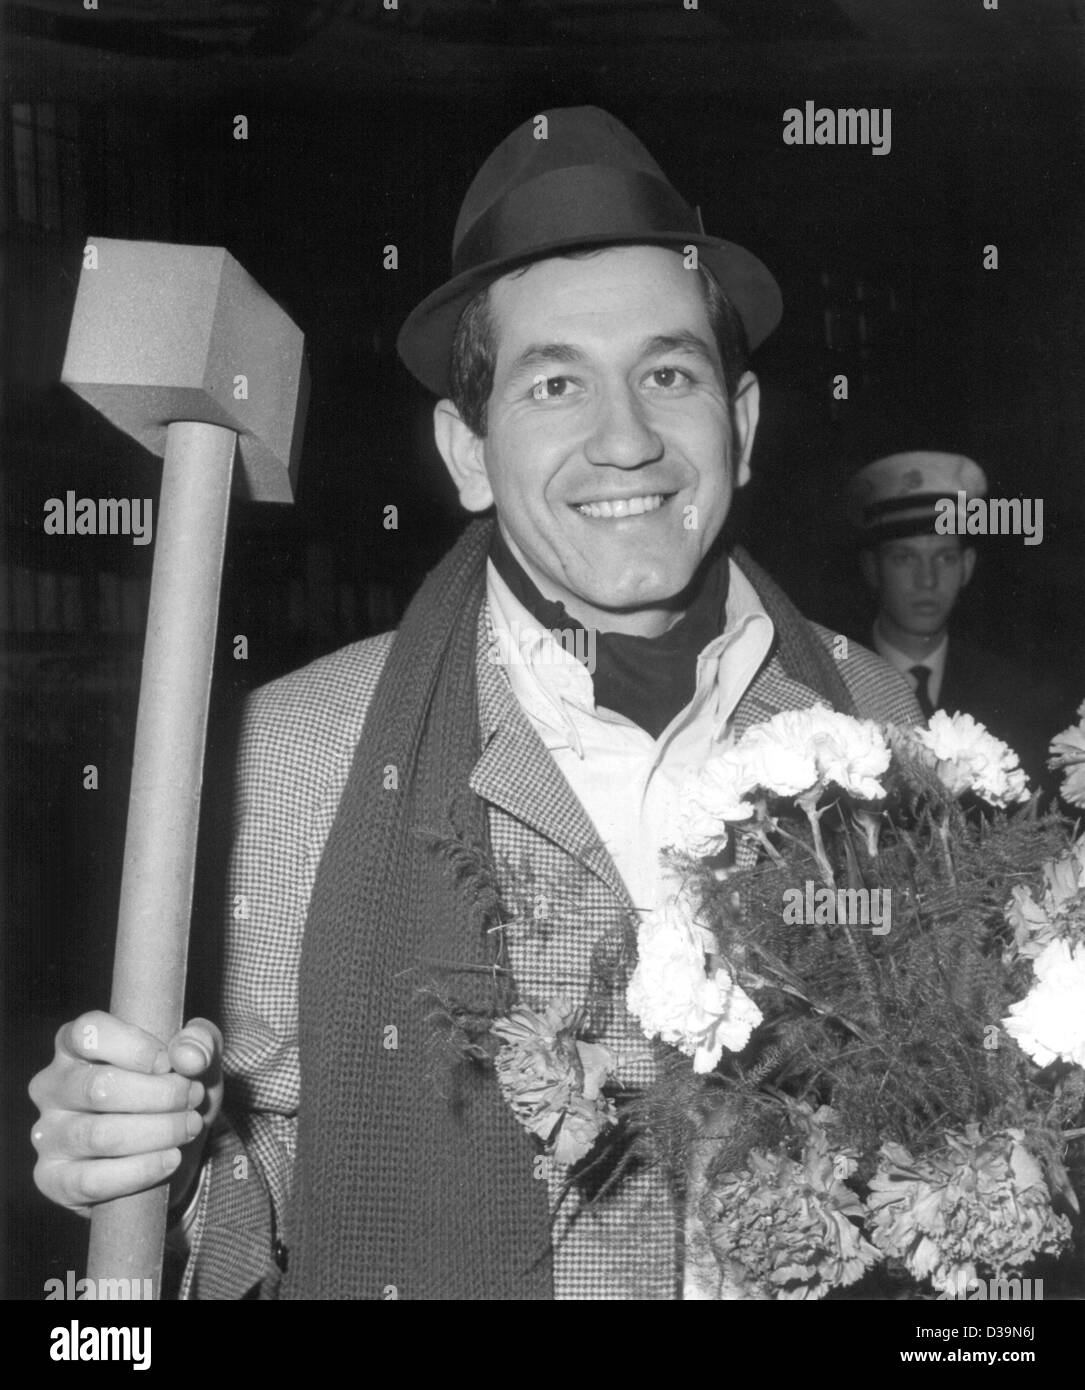 dpa) - American latin pop singer Trini Lopez, who became world famous with  songs like 'If I Had A Hammer' and 'Lemon Tree', poses with a hammer at his  arrival in Berlin,